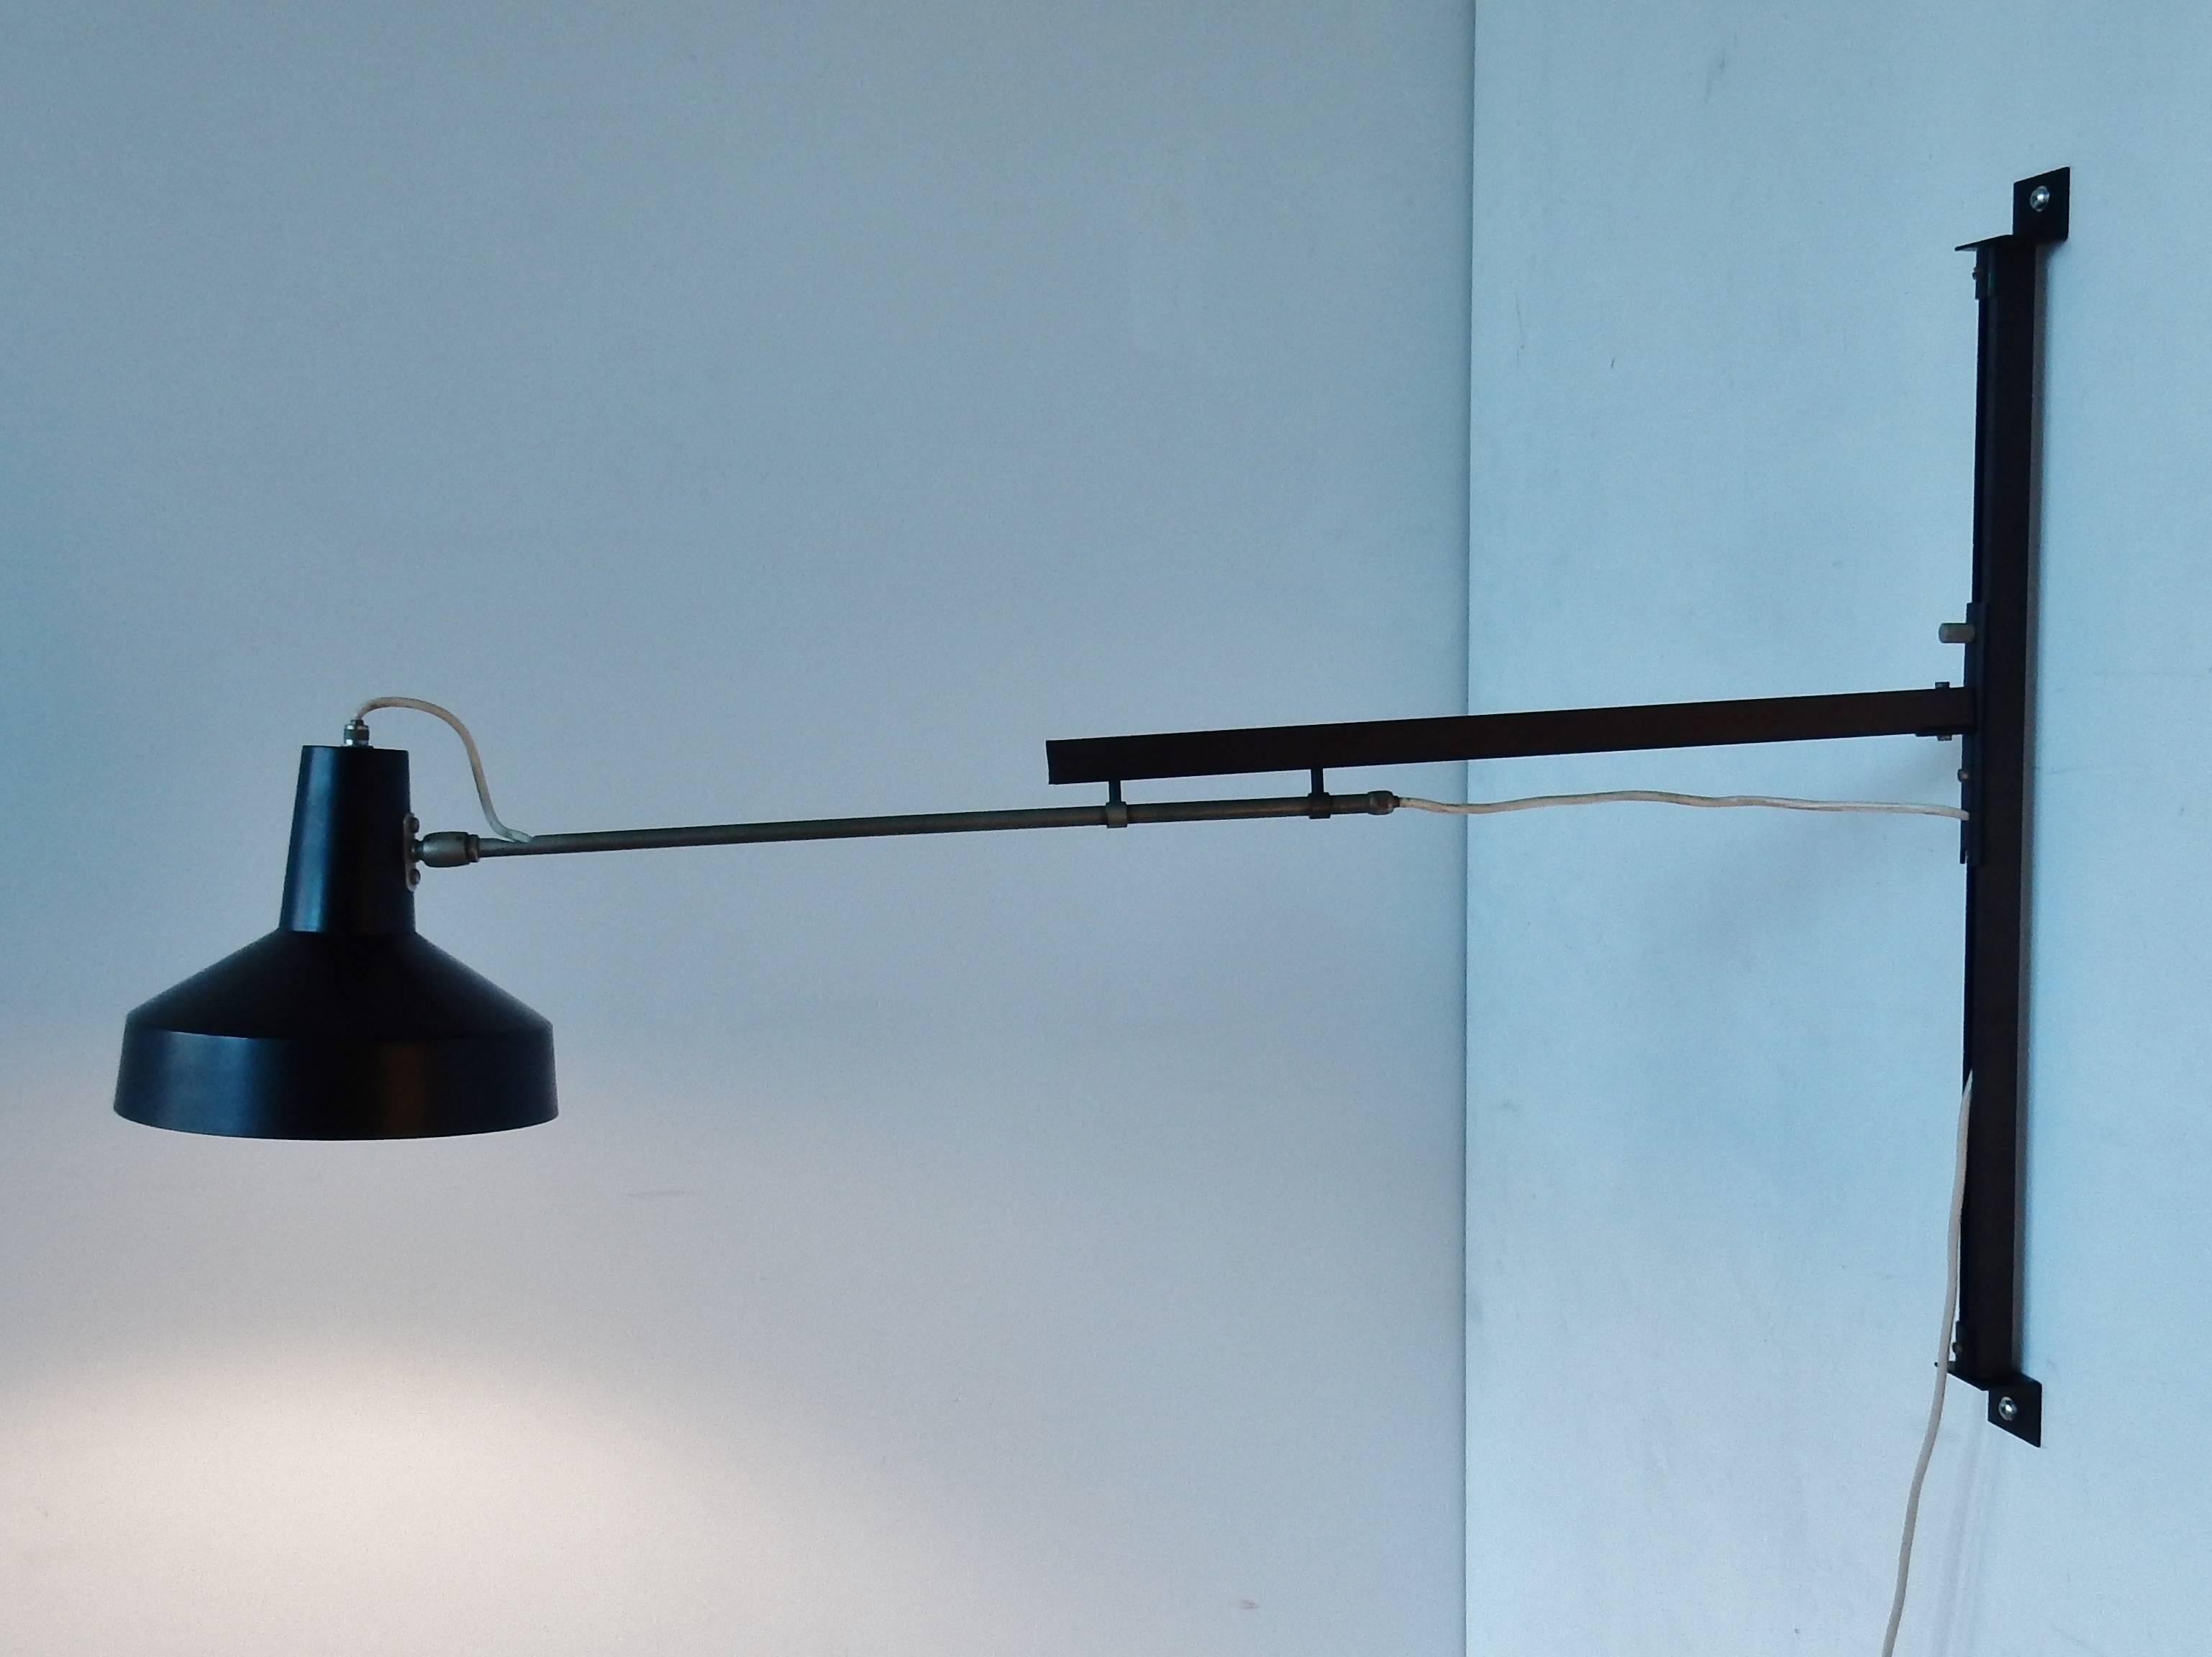 Mid-20th Century Black Telescopic Wall Lamp by Hiemstra Evolux Dutch Design, Netherlands, 1960s For Sale